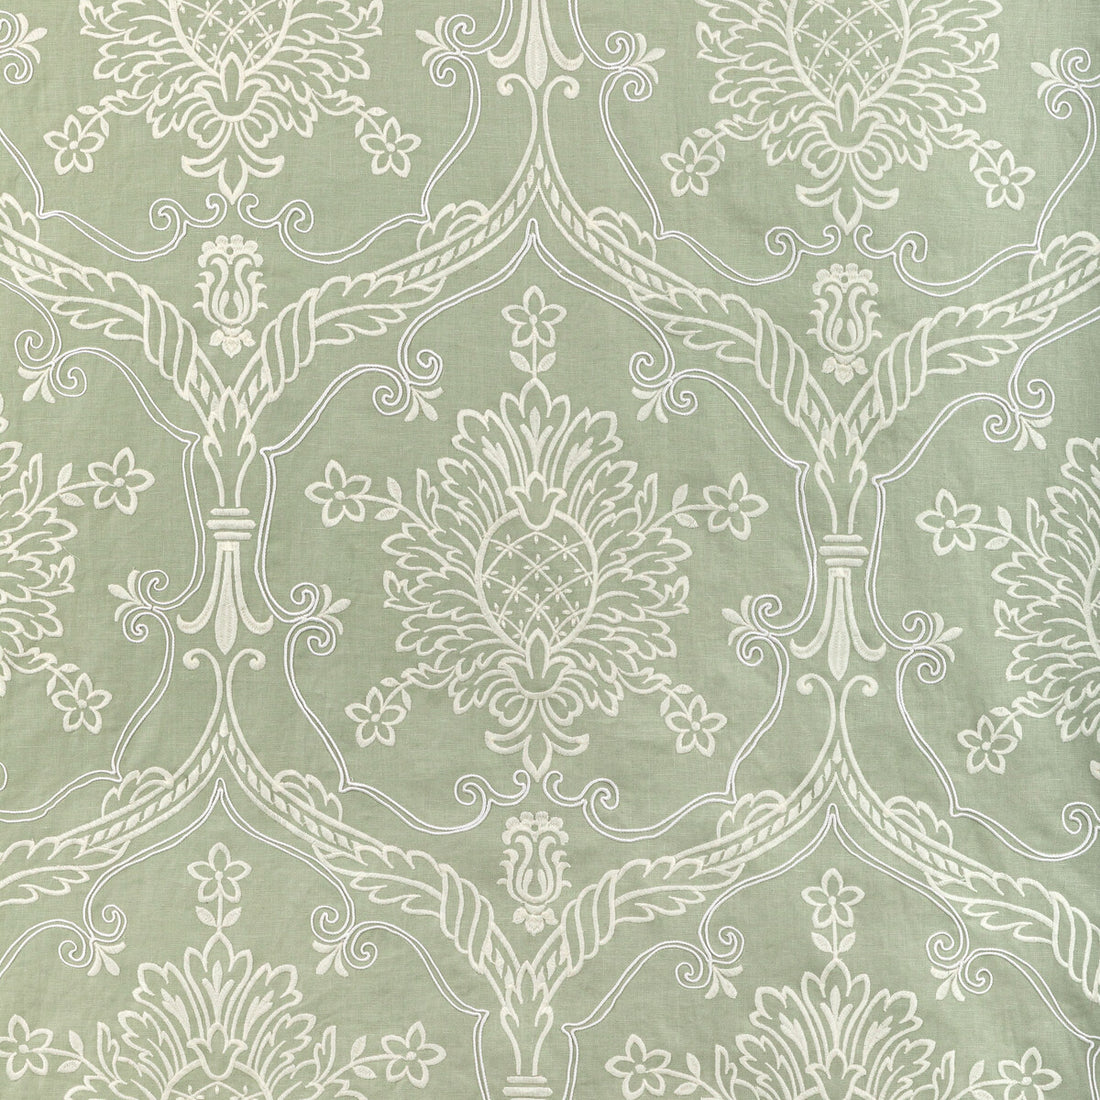 Hayes Embroidery fabric in celery color - pattern 2022110.123.0 - by Lee Jofa in the Bunny Williams Arcadia collection